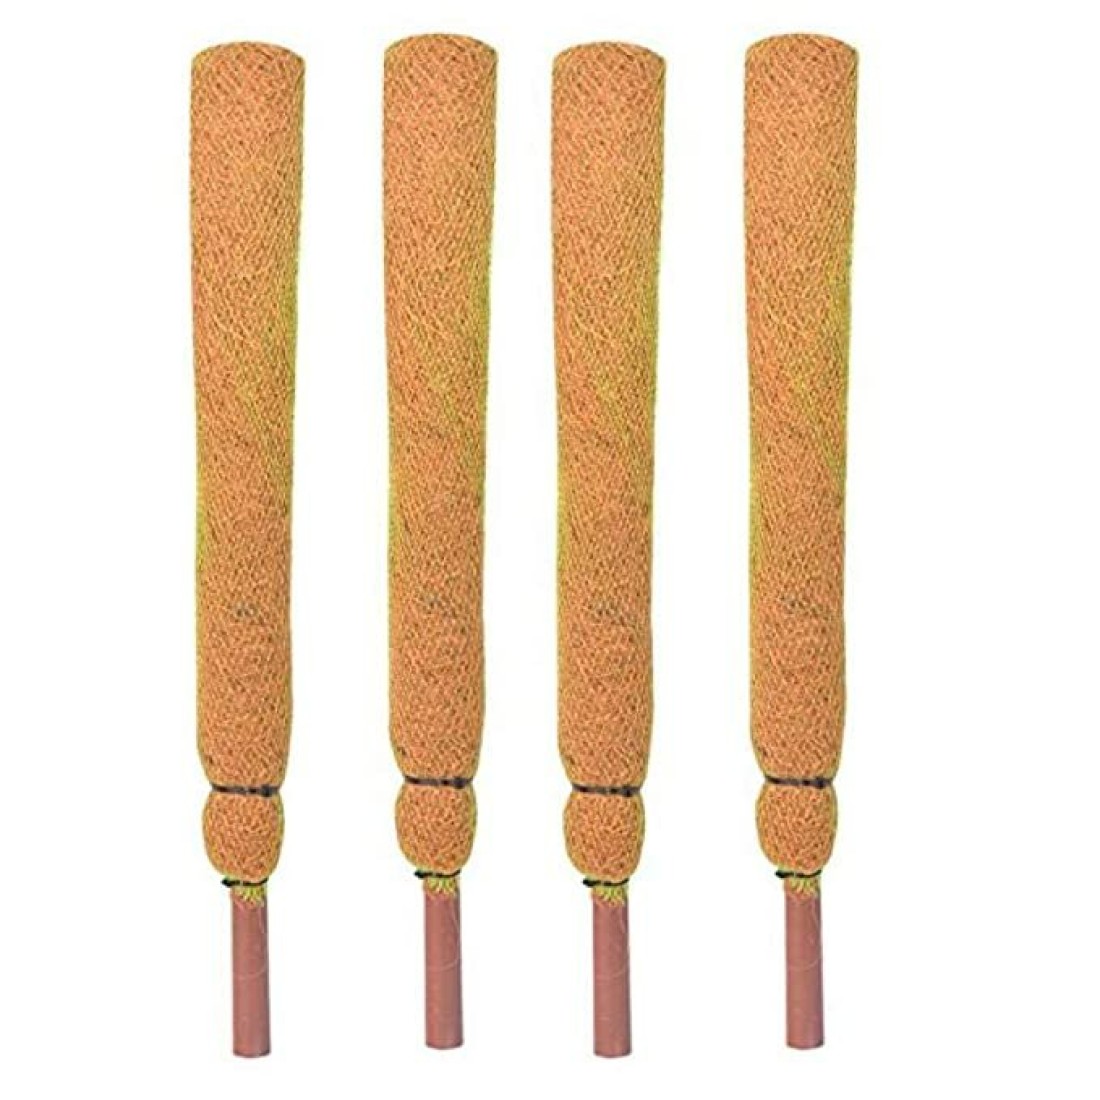 Coco Pole 1 Feet (30 cm) Moss & Coir Stick for Money Plant Support, Indoor Plants, House Plants & Plant Creepers-set of 4 2